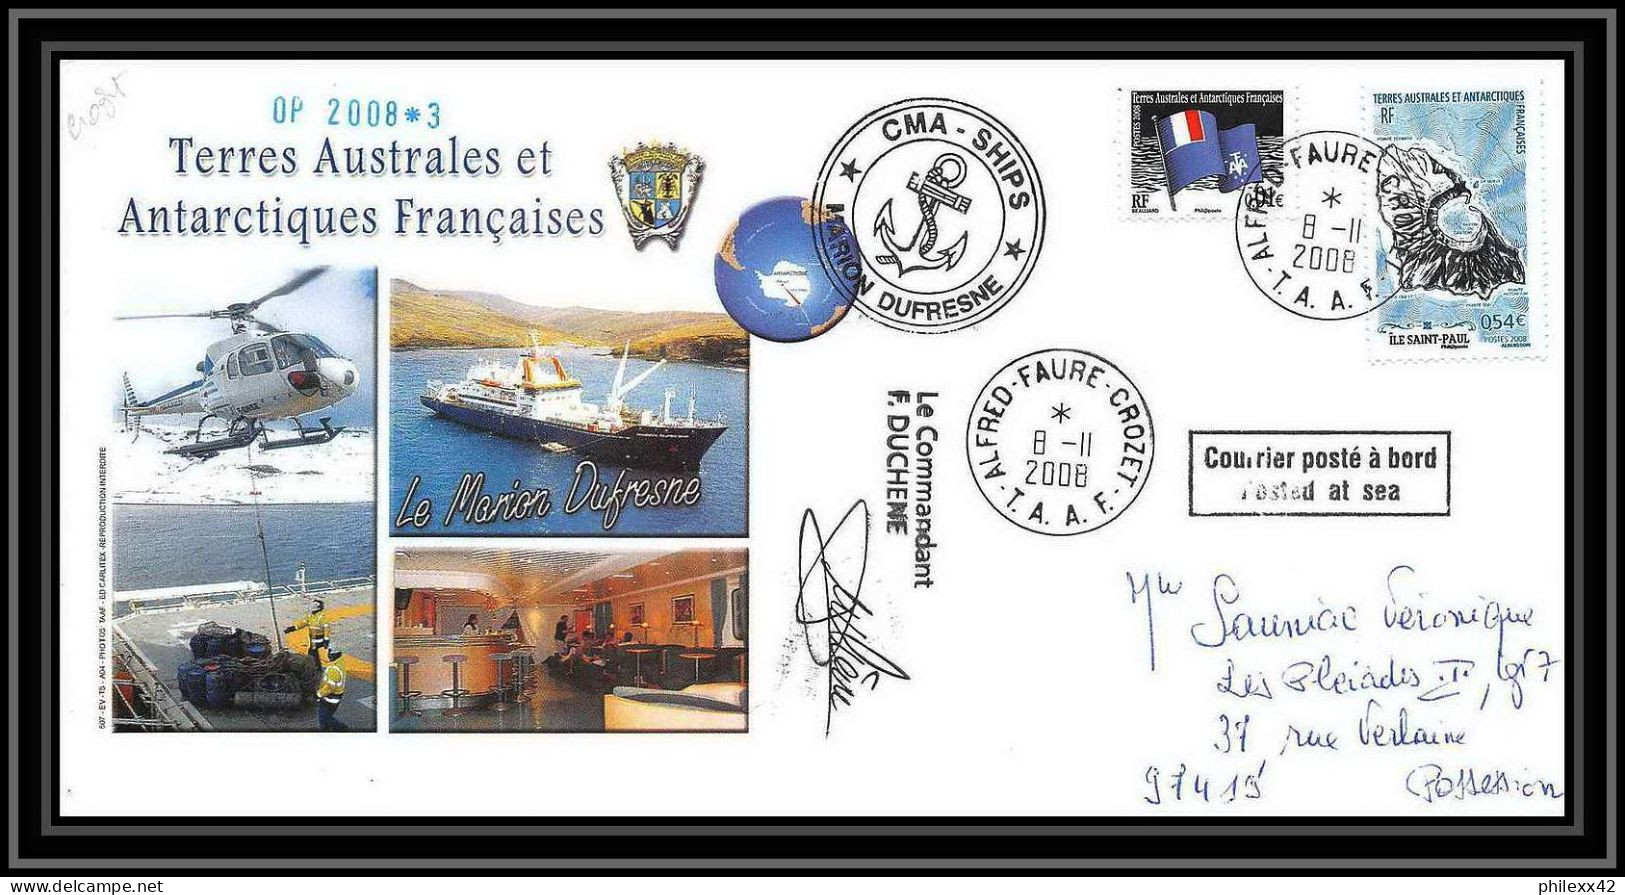 2845 ANTARCTIC Terres Australes TAAF Helilagon Lettre Cover Dufresne Signé Signed Op 2008/3 Crozet 8/11/2008 N°506 - Hélicoptères